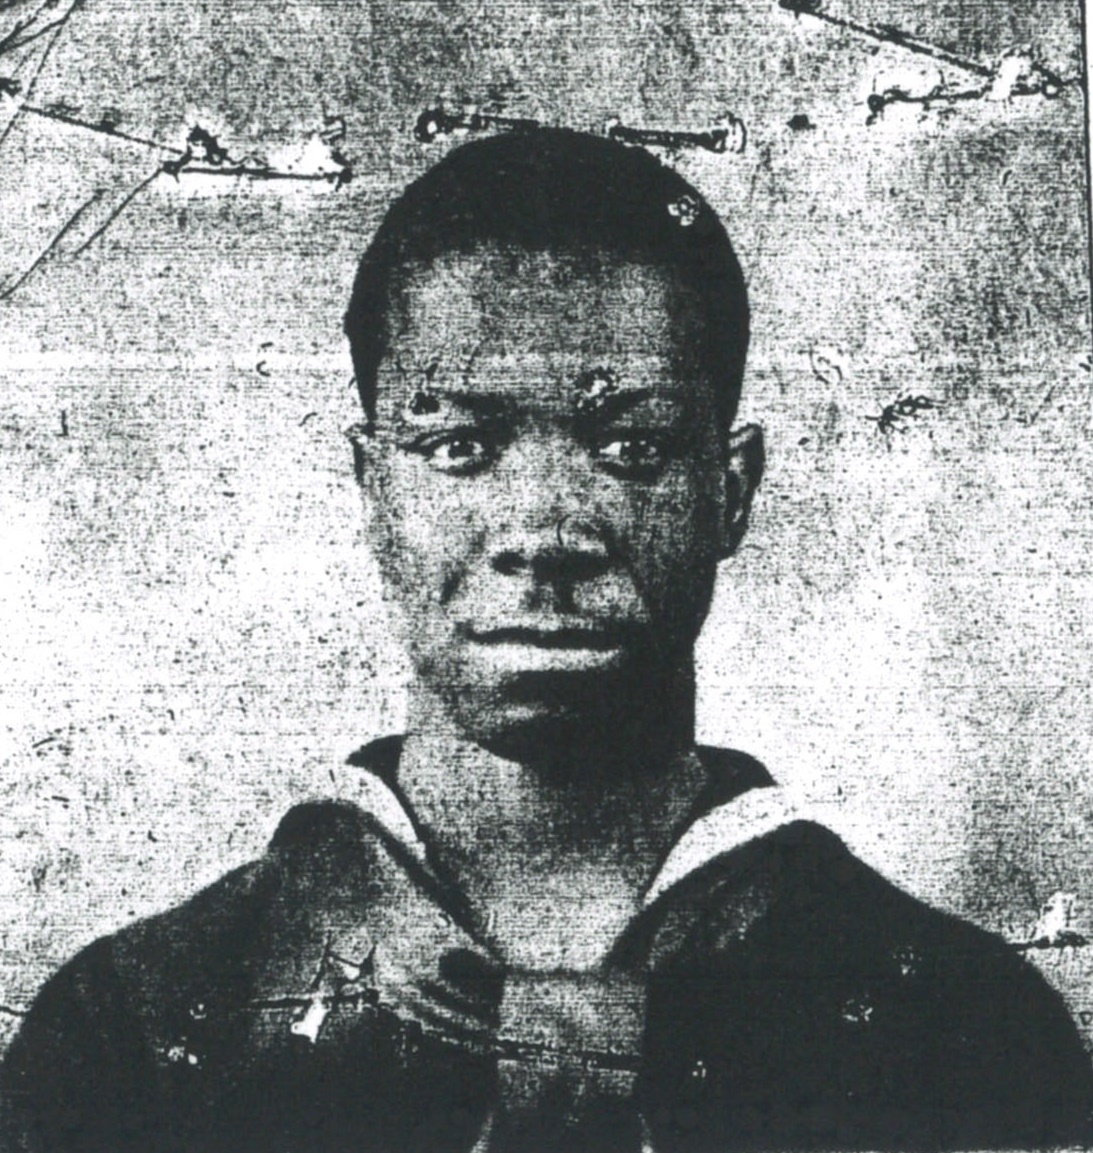 Faded photograph of Louis Etheridge early in his career as a third class mess attendant. (U.S. Coast Guard)